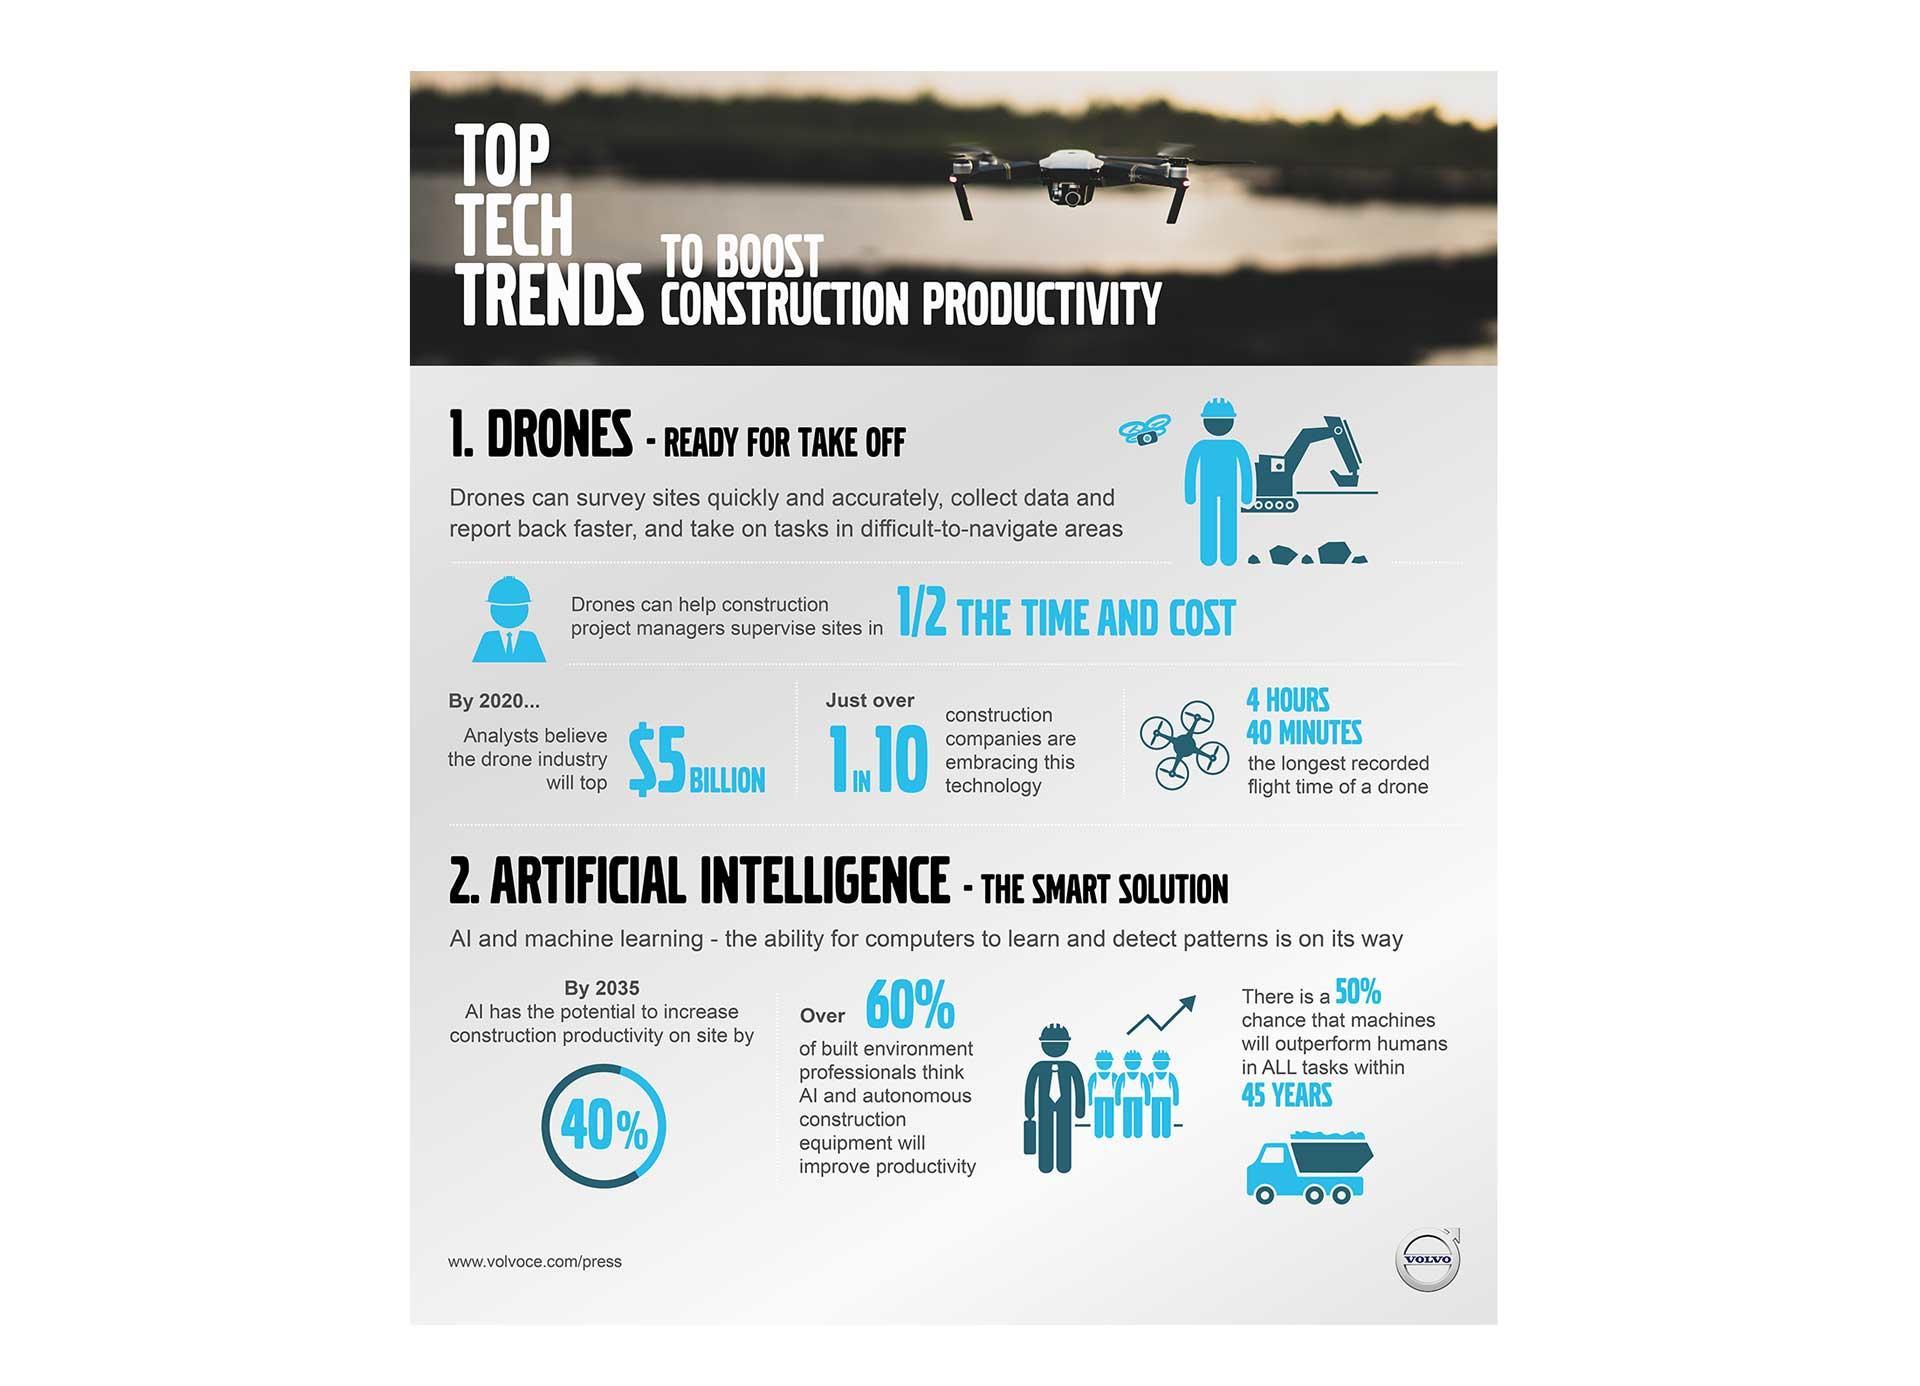 Volvo Construction Logo - INFOGRAPHICS: Top tech trends to boost construction productivity